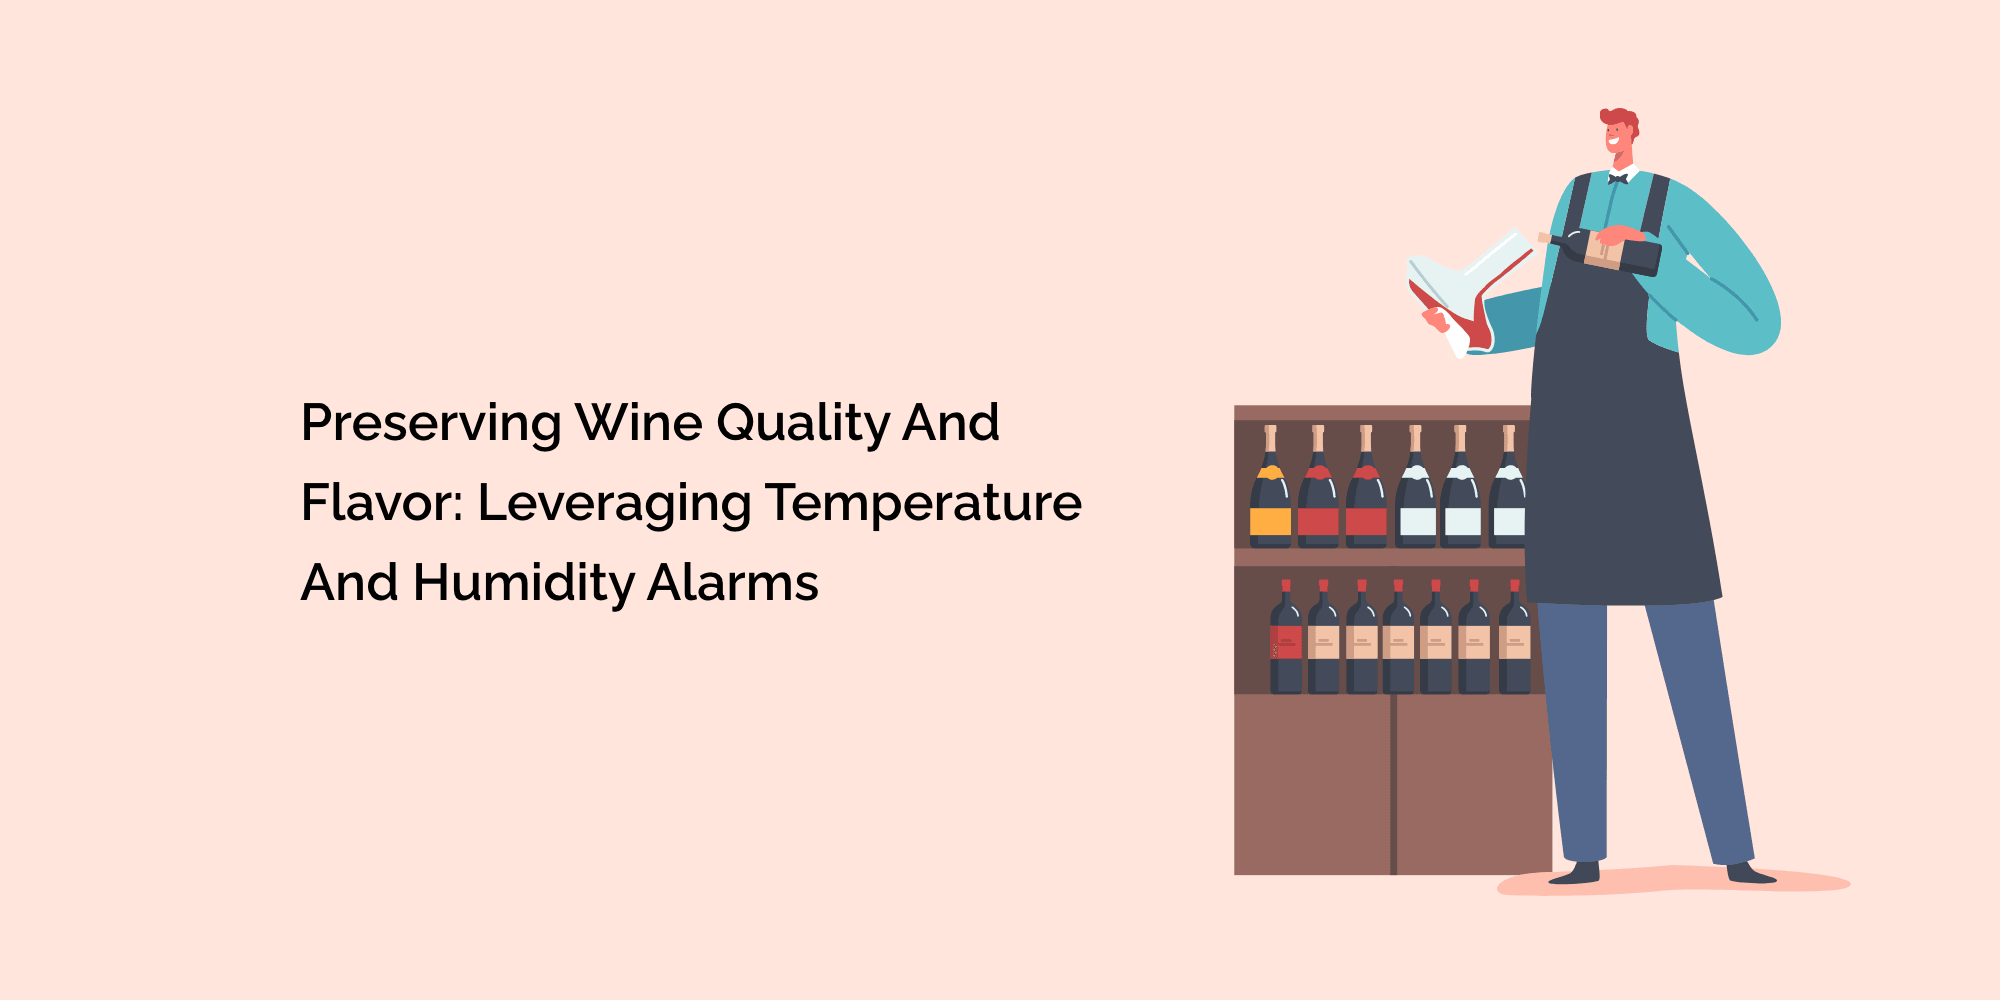 Preserving Wine Quality and Flavor: Leveraging Temperature and Humidity Alarms